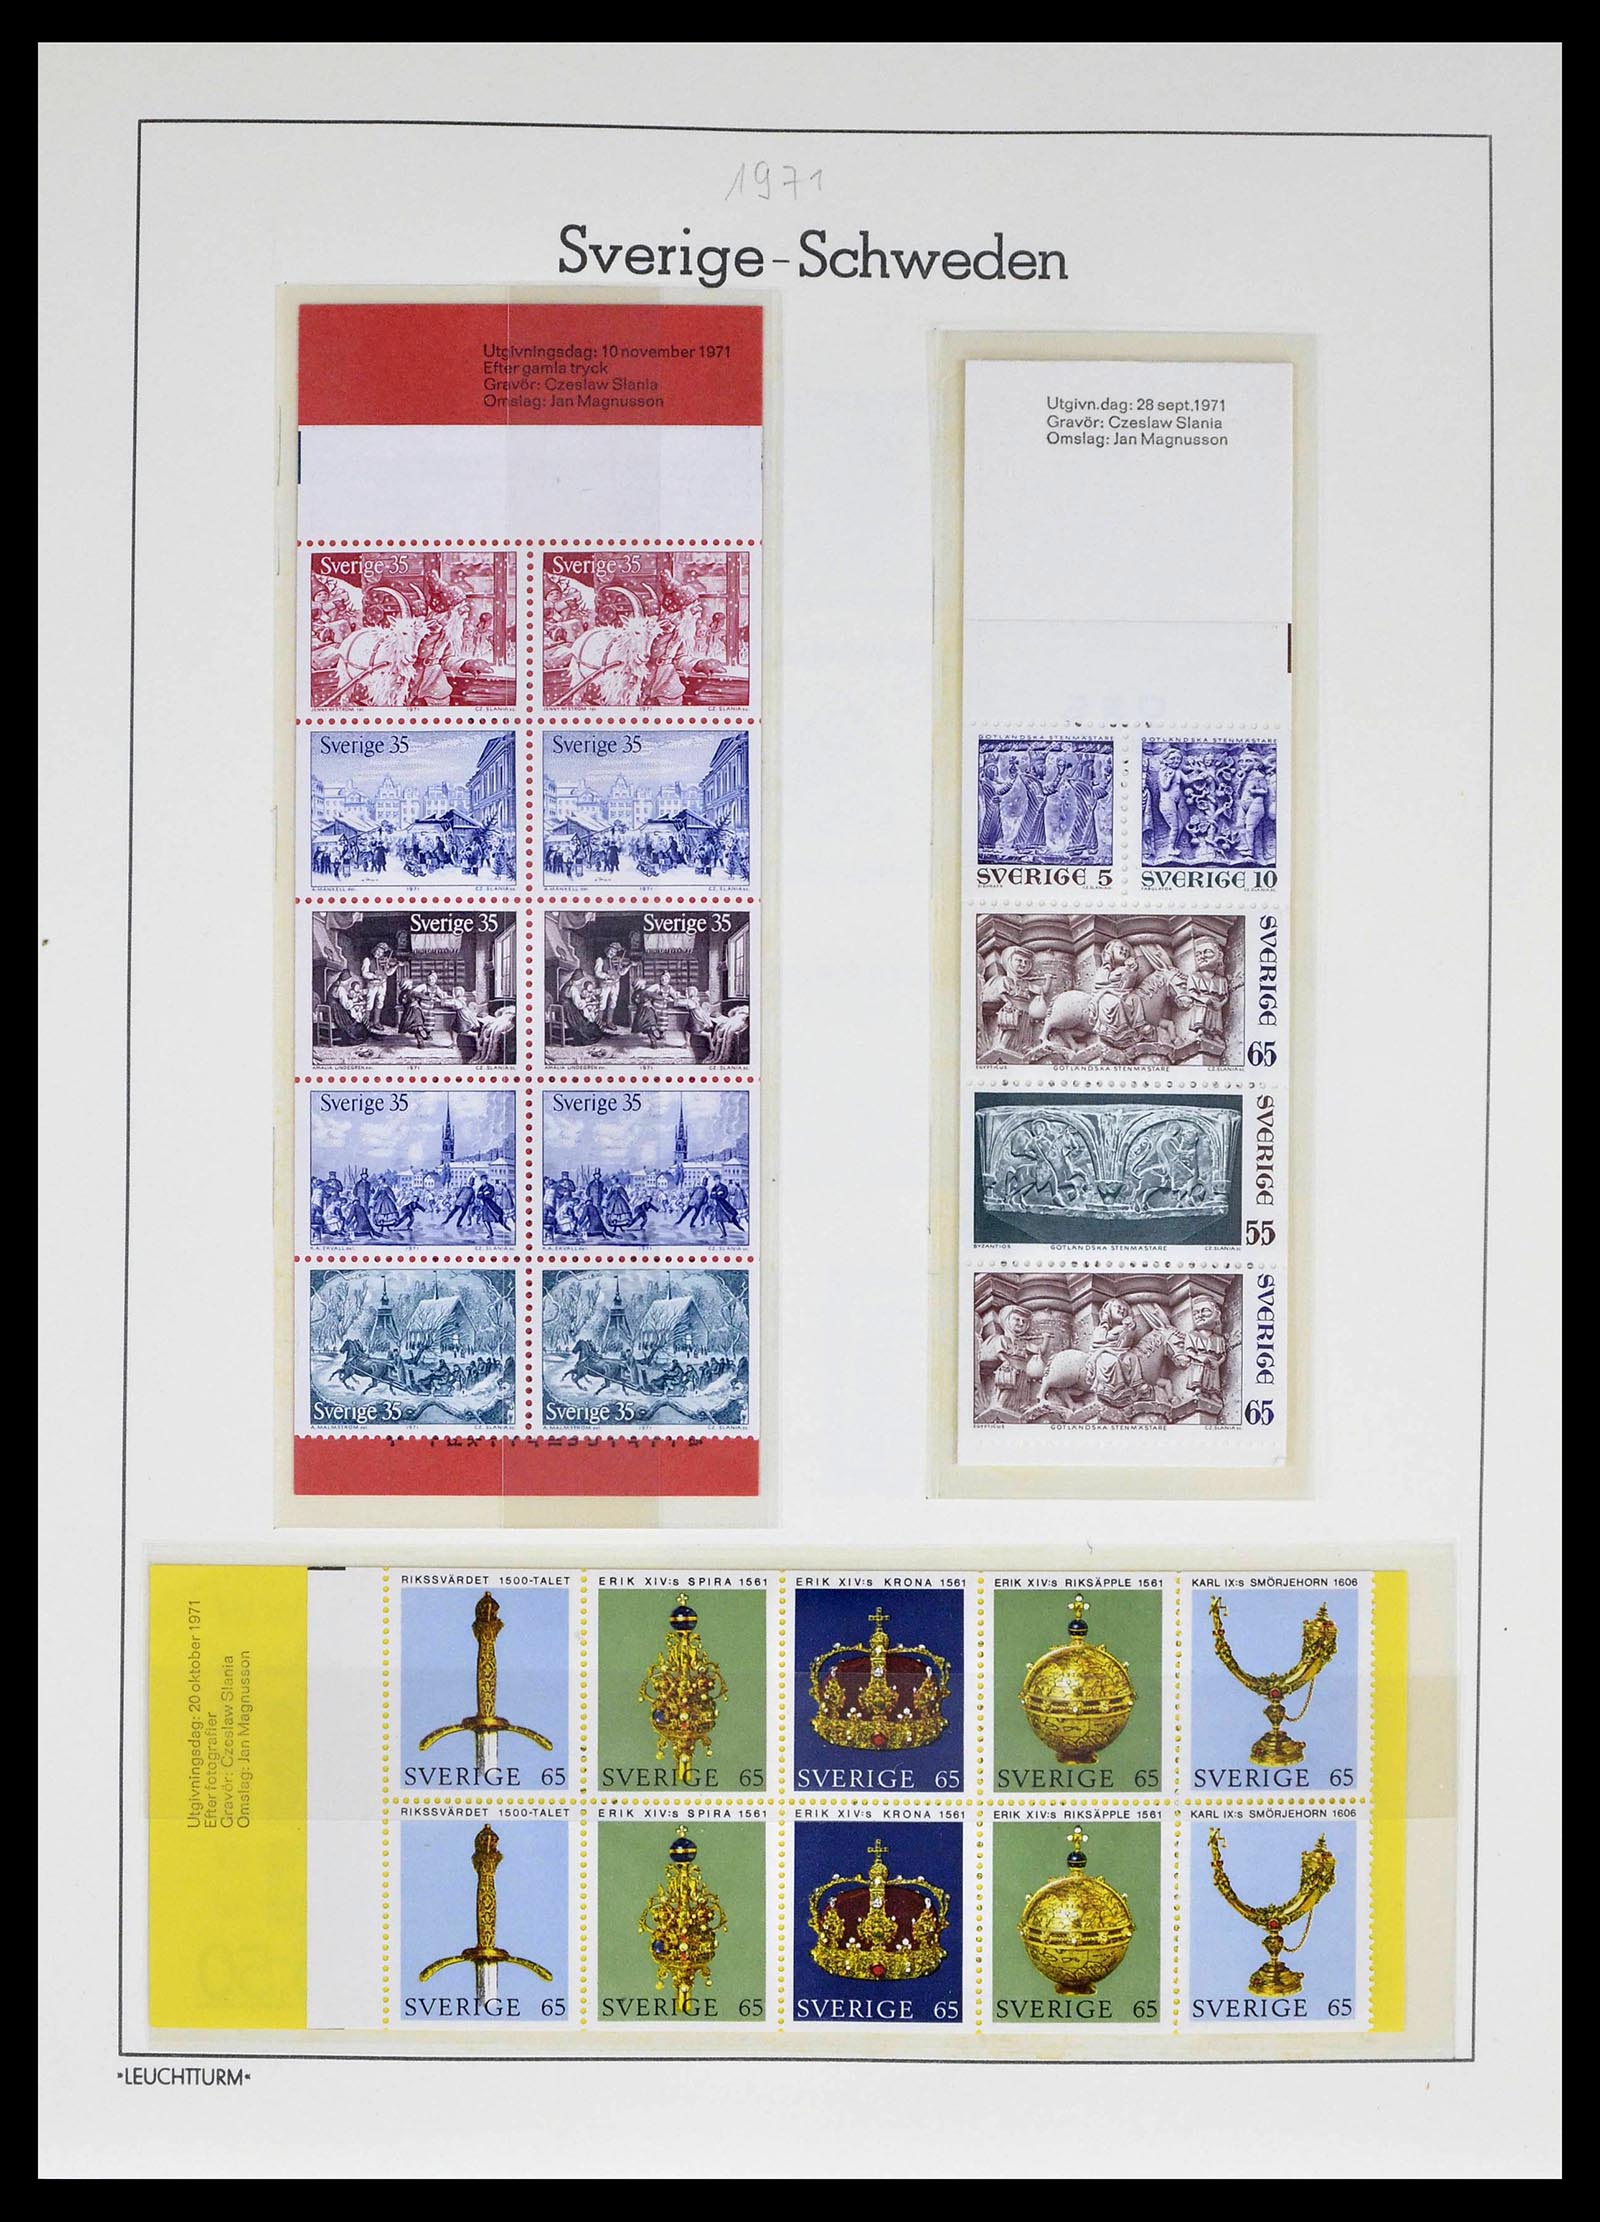 39332 0003 - Stamp collection 39332 Sweden 1969-1989.